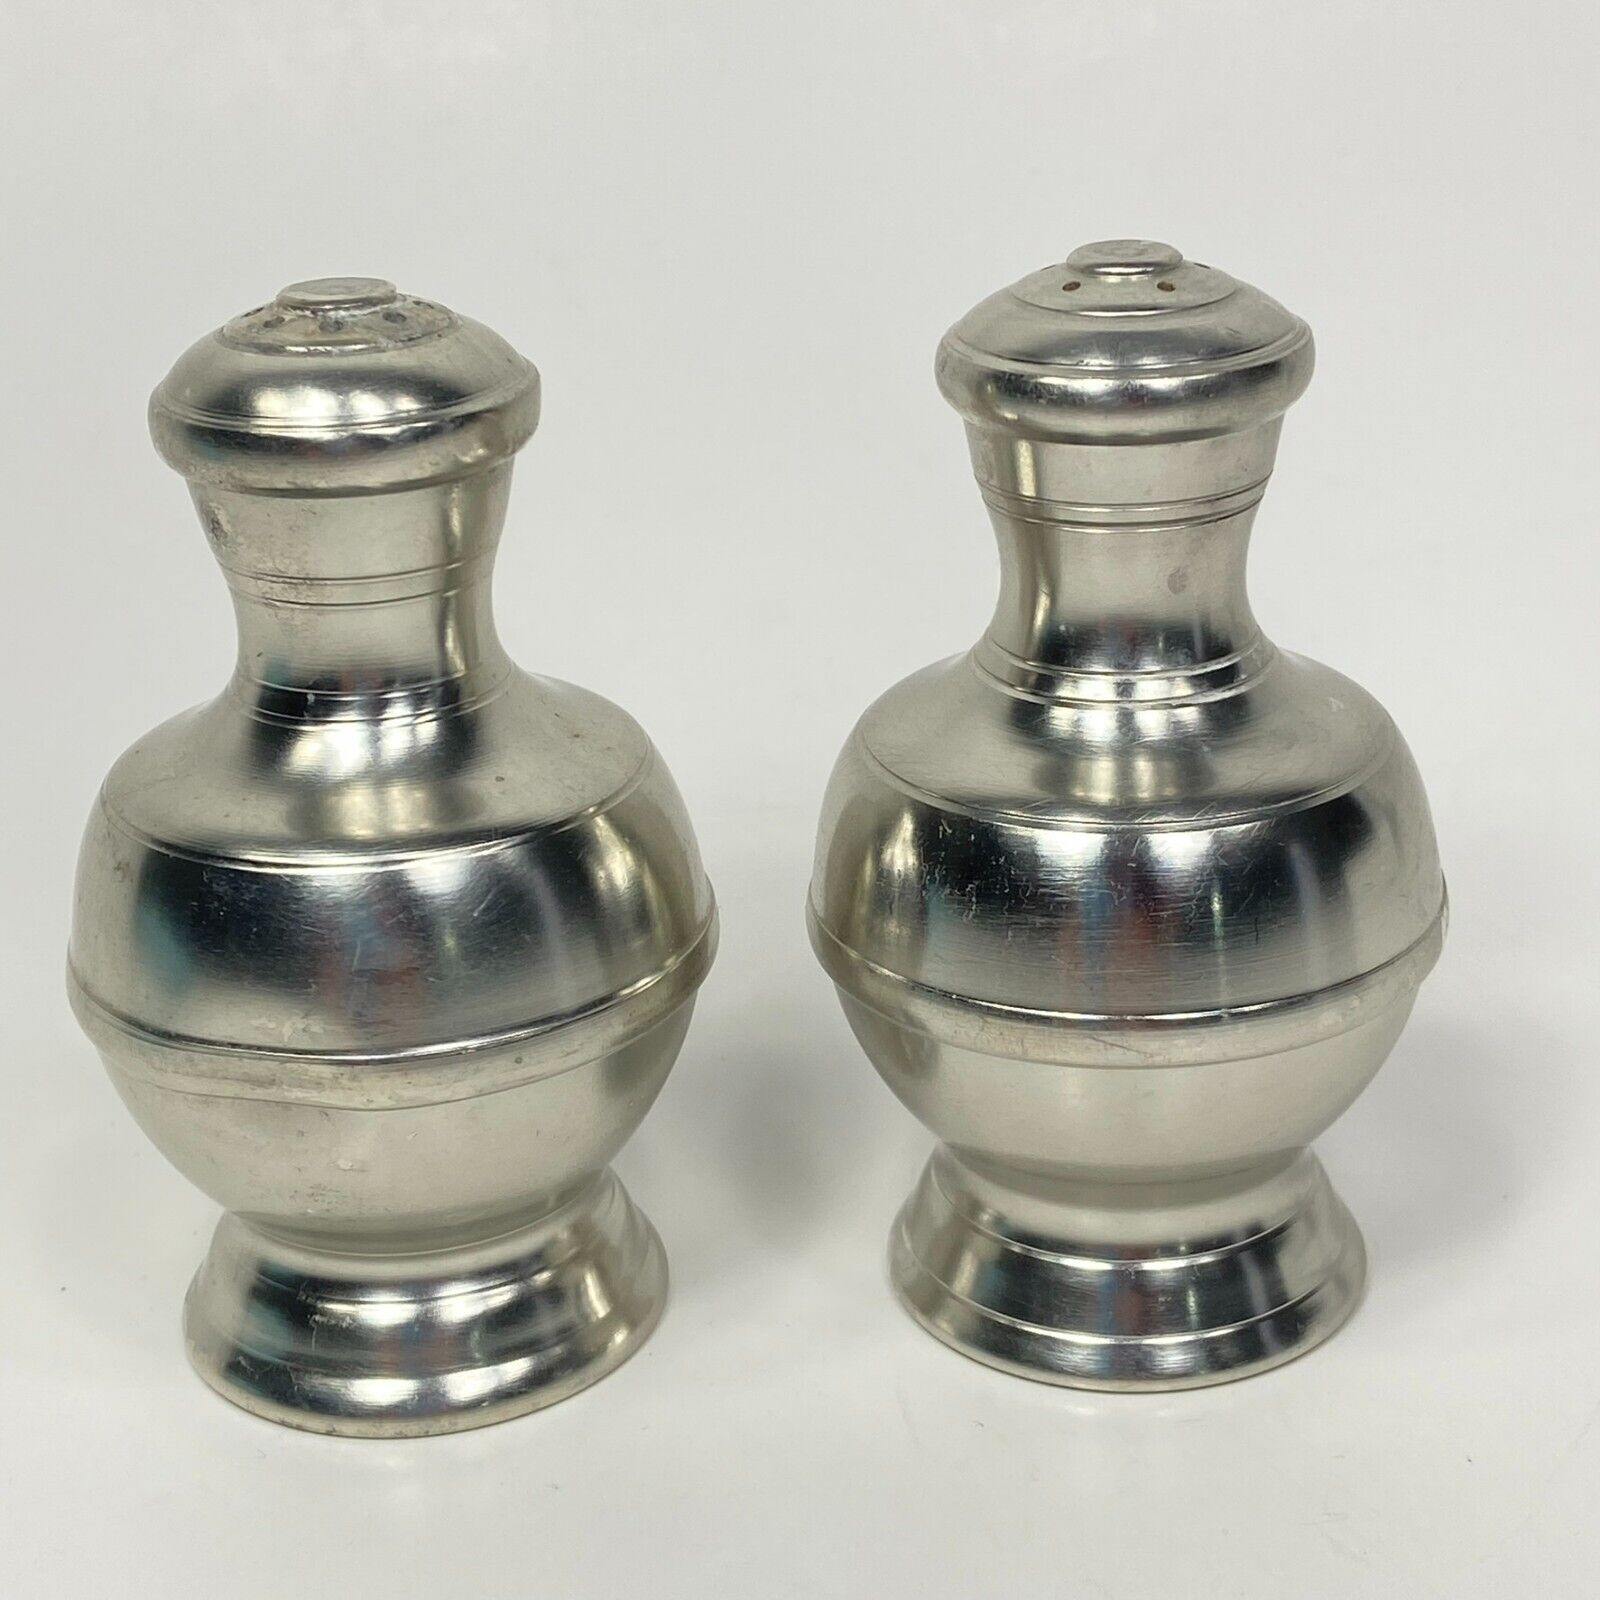 Vintage Metawa Holland Real Pewter Salt and Pepper Shakers 3.5 Inches